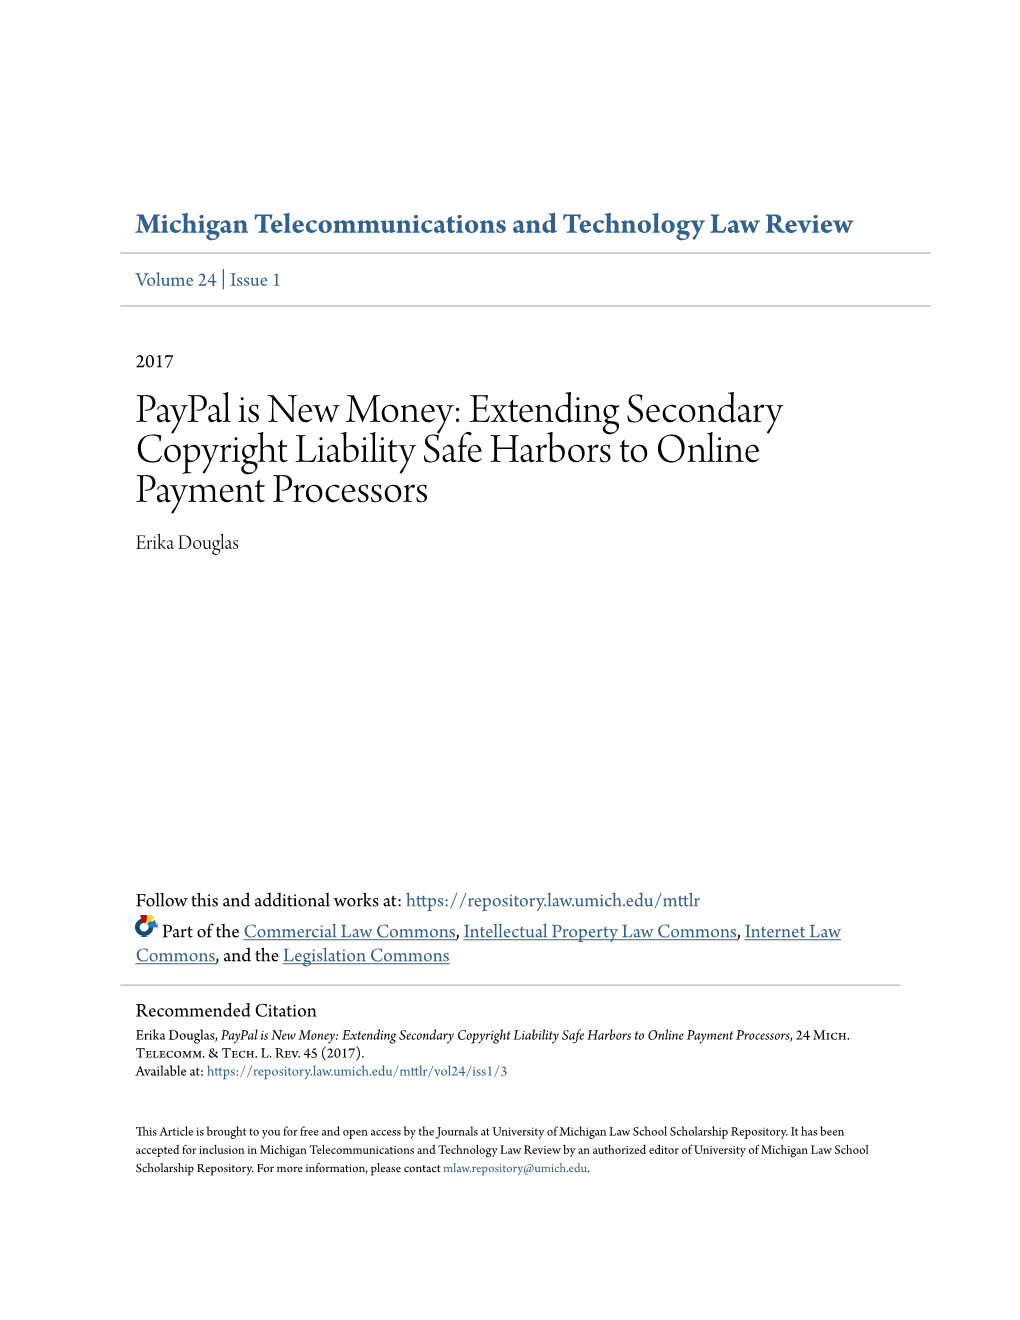 Paypal Is New Money: Extending Secondary Copyright Liability Safe Harbors to Online Payment Processors Erika Douglas